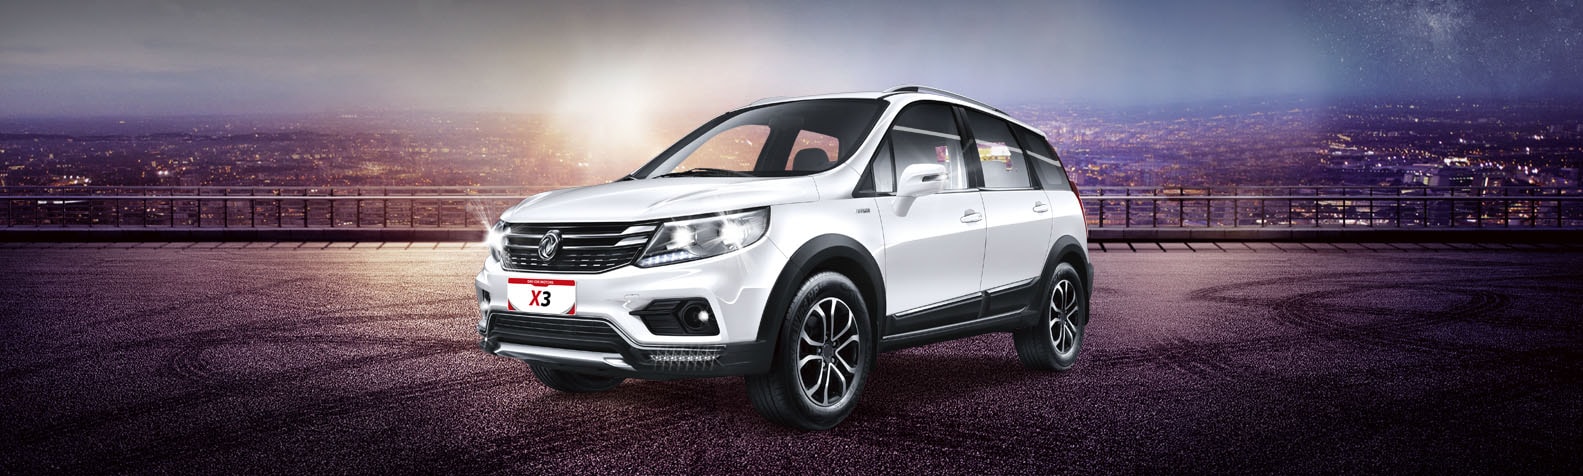 DONGFENG_X3_